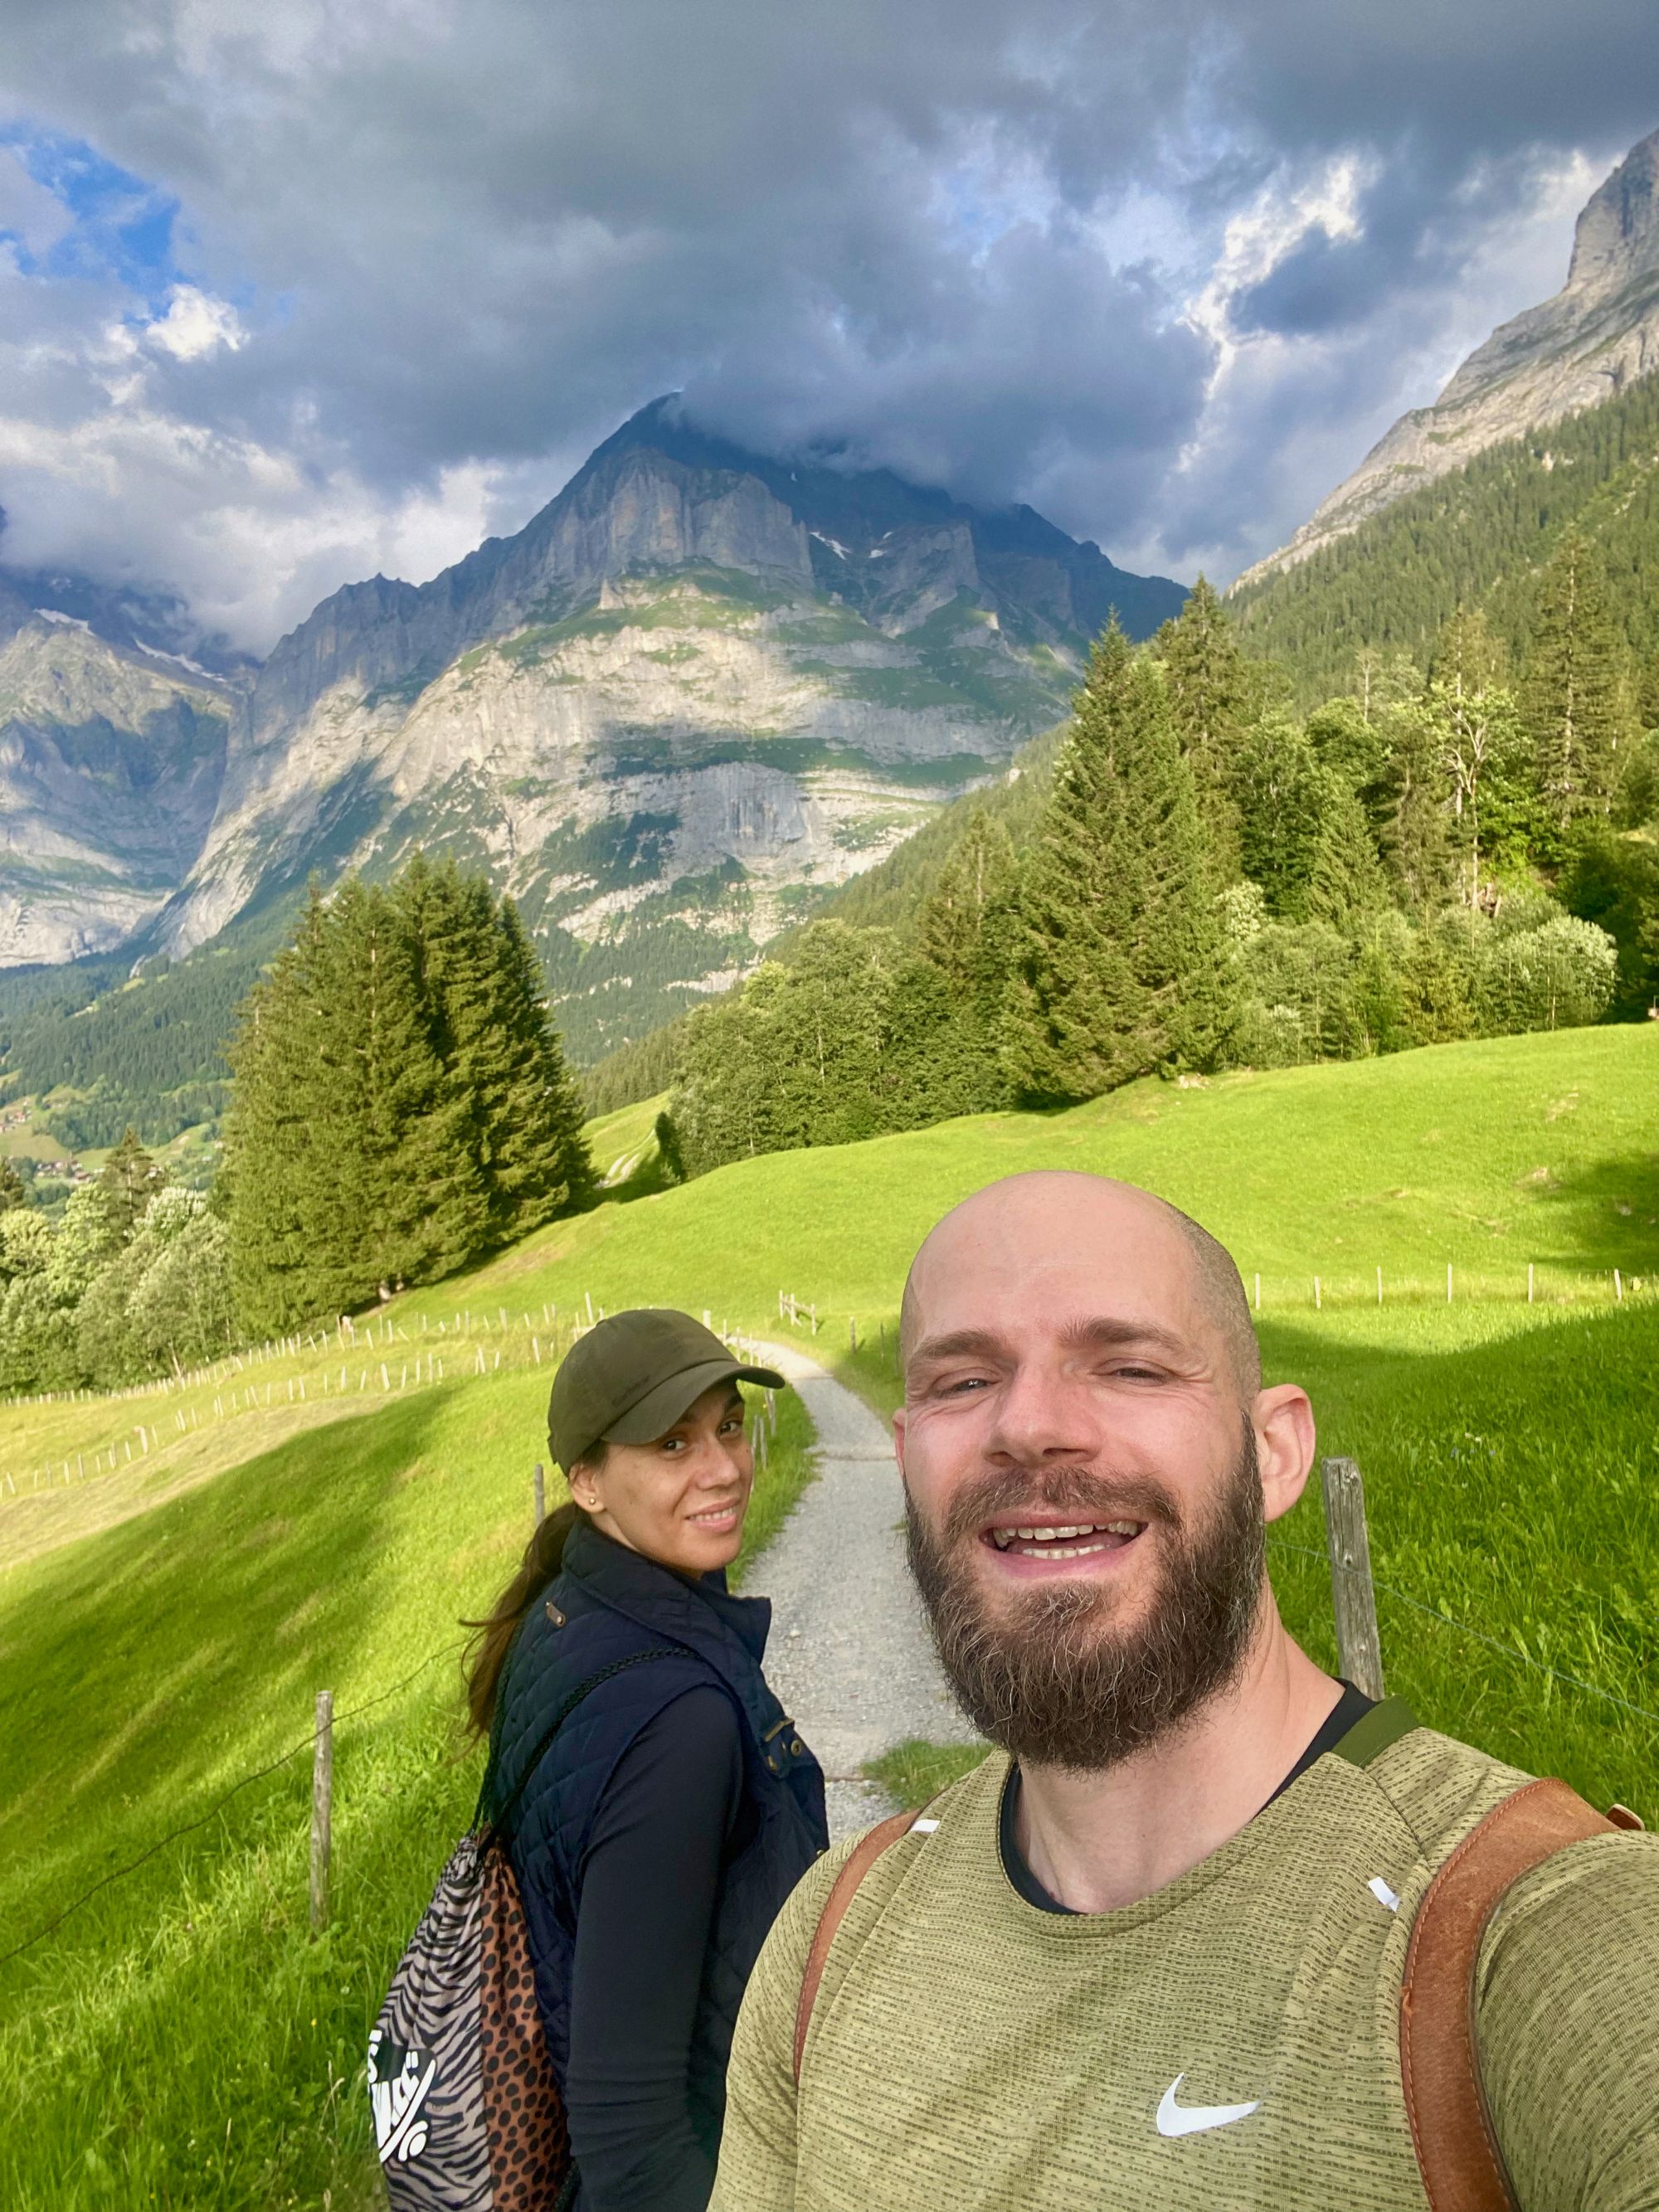 Second Road Trip Part 01: Our 5 Day Itinerary in Switzerland